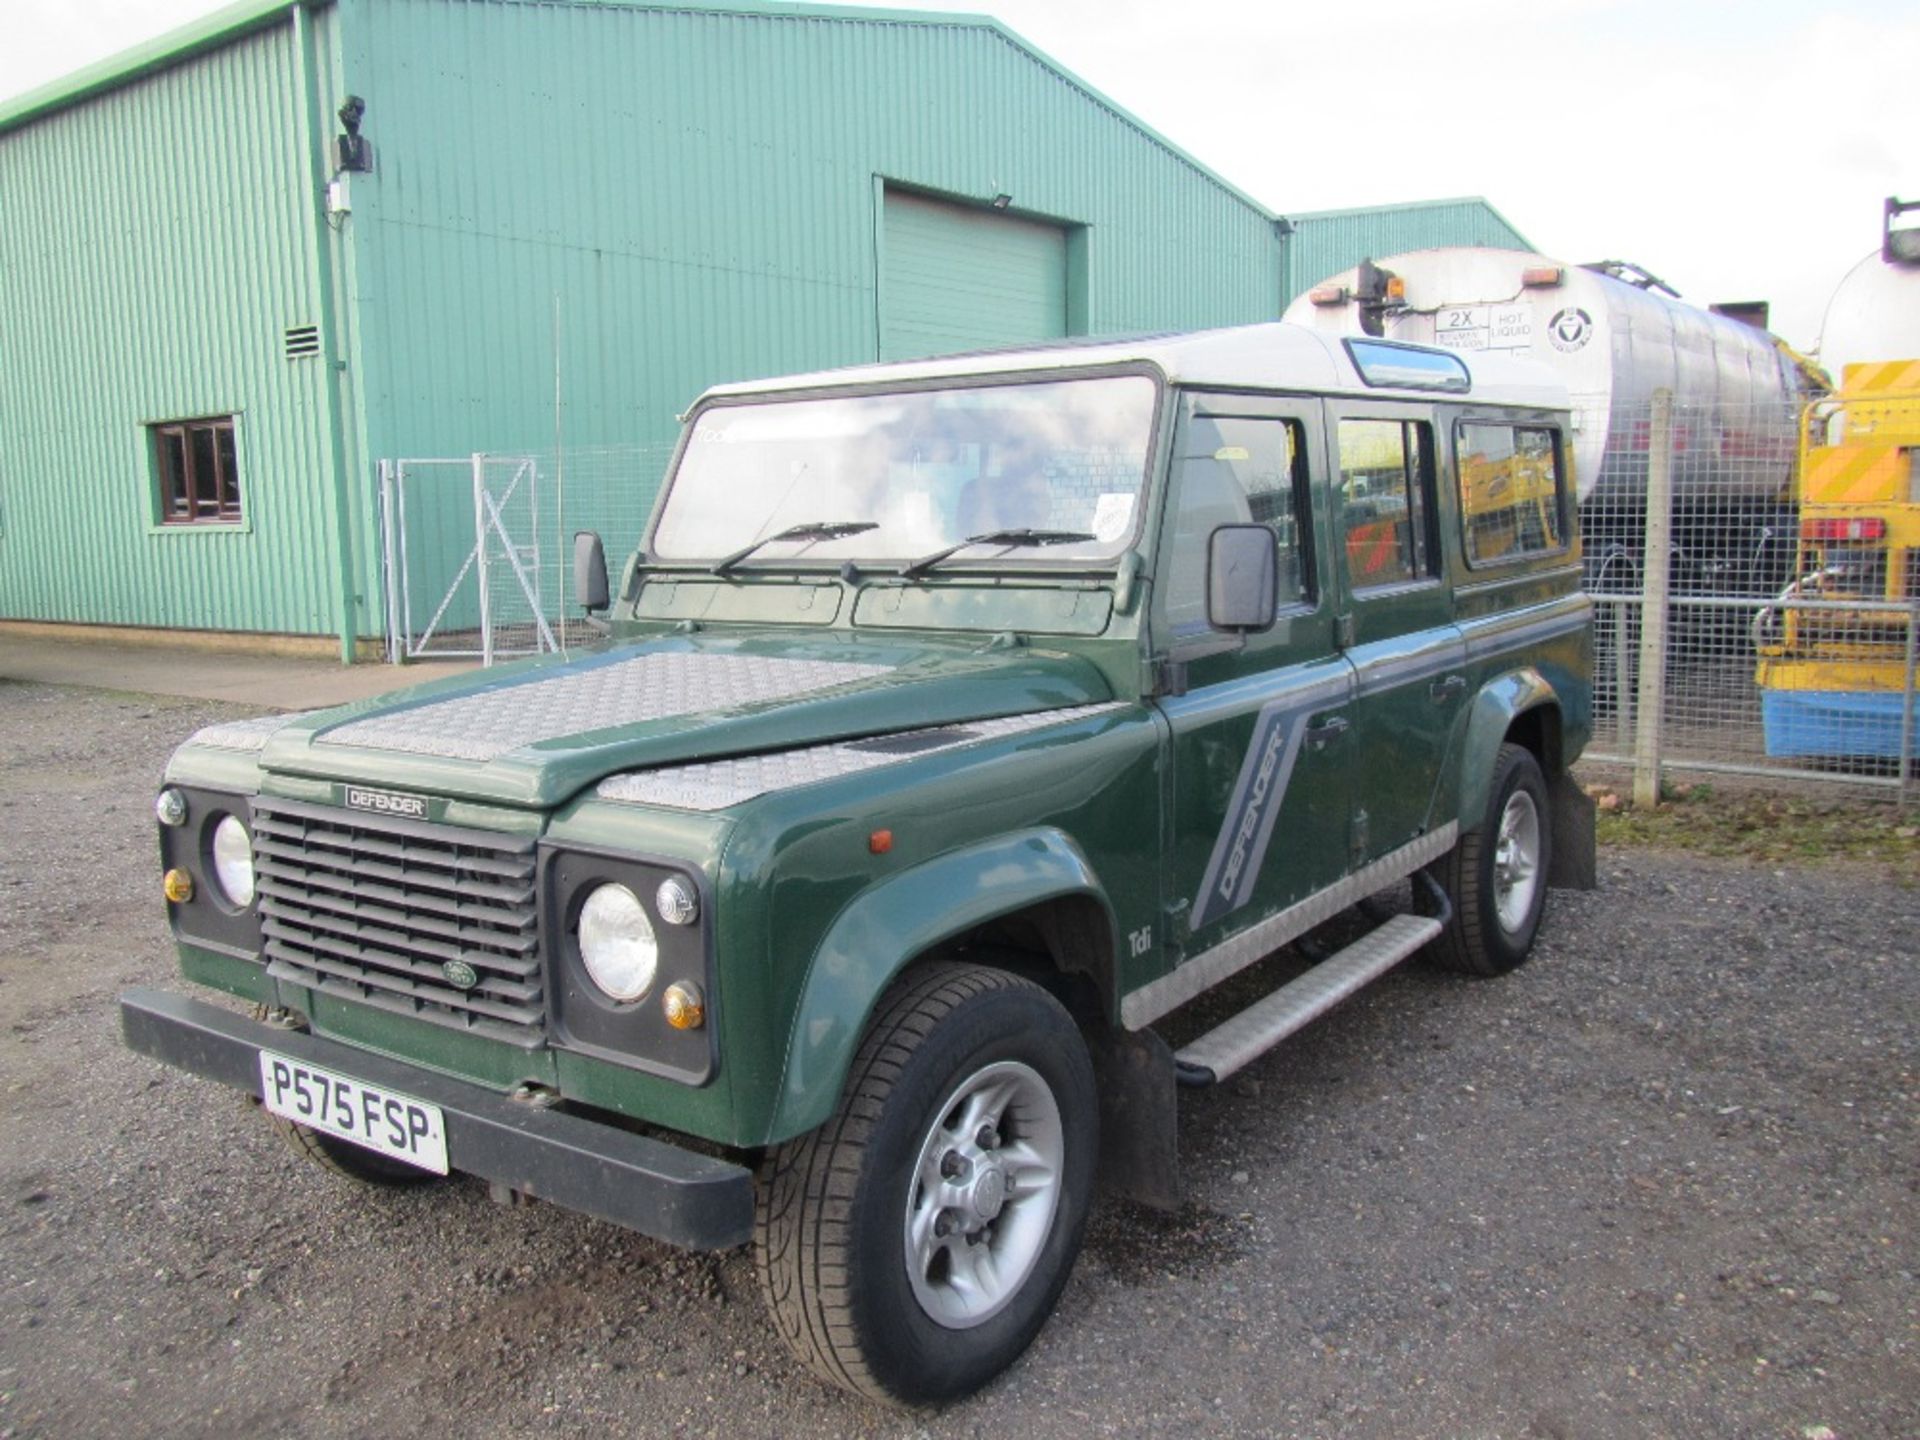 Land Rover Defender 110 TDI County Station Wagon Reg Docs will be supplied. Mileage: 191,840. MOT